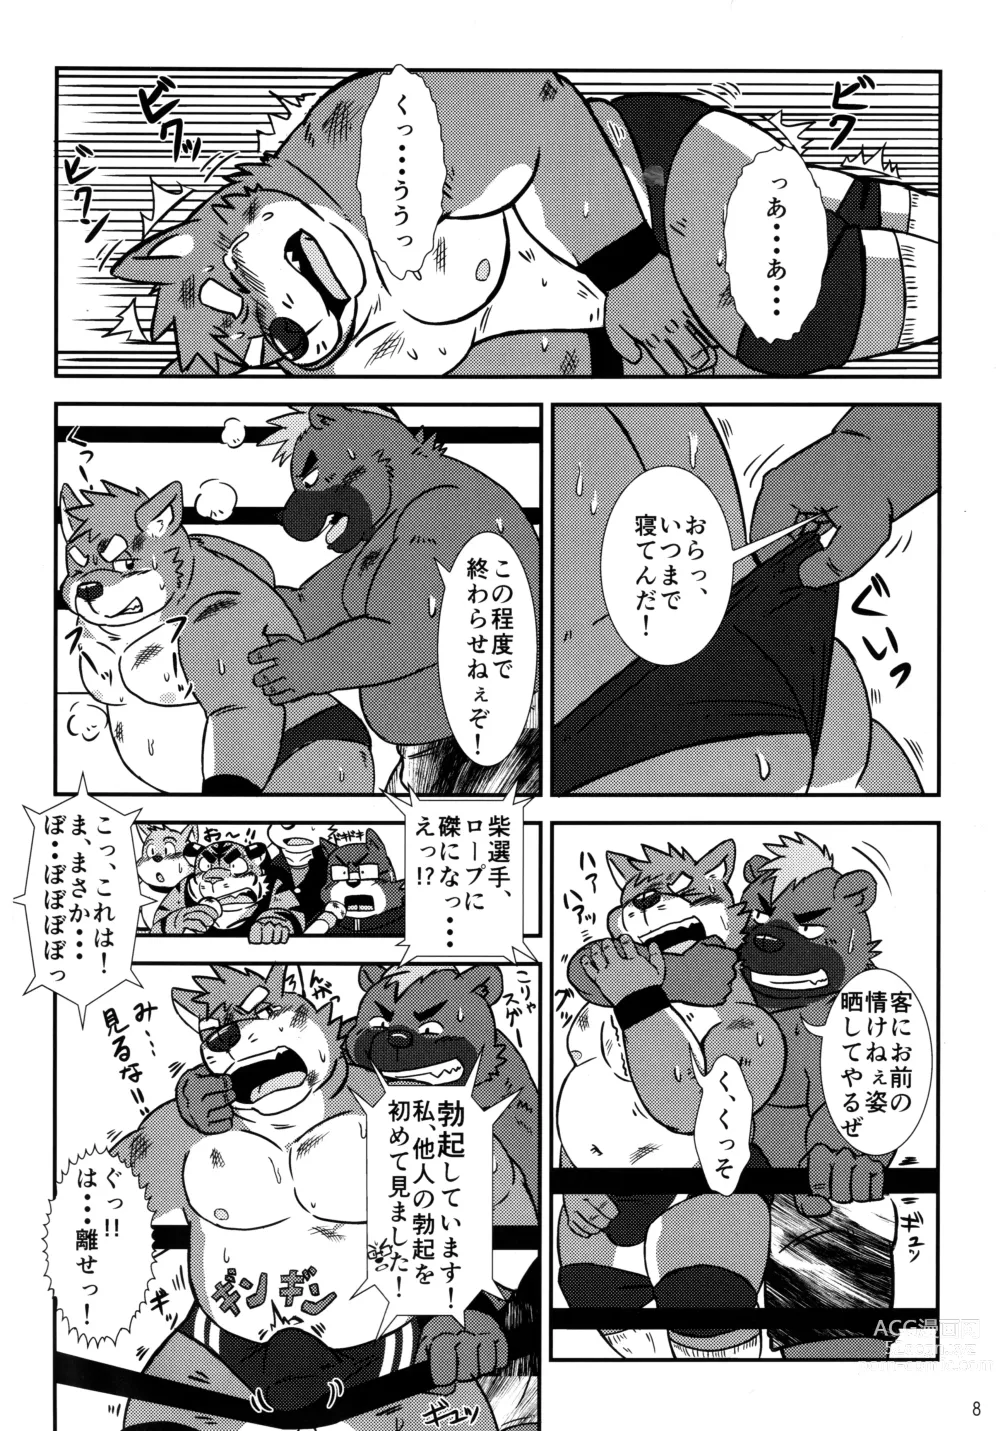 Page 9 of doujinshi BFW -BEAST FIGHTER WRESTLING-